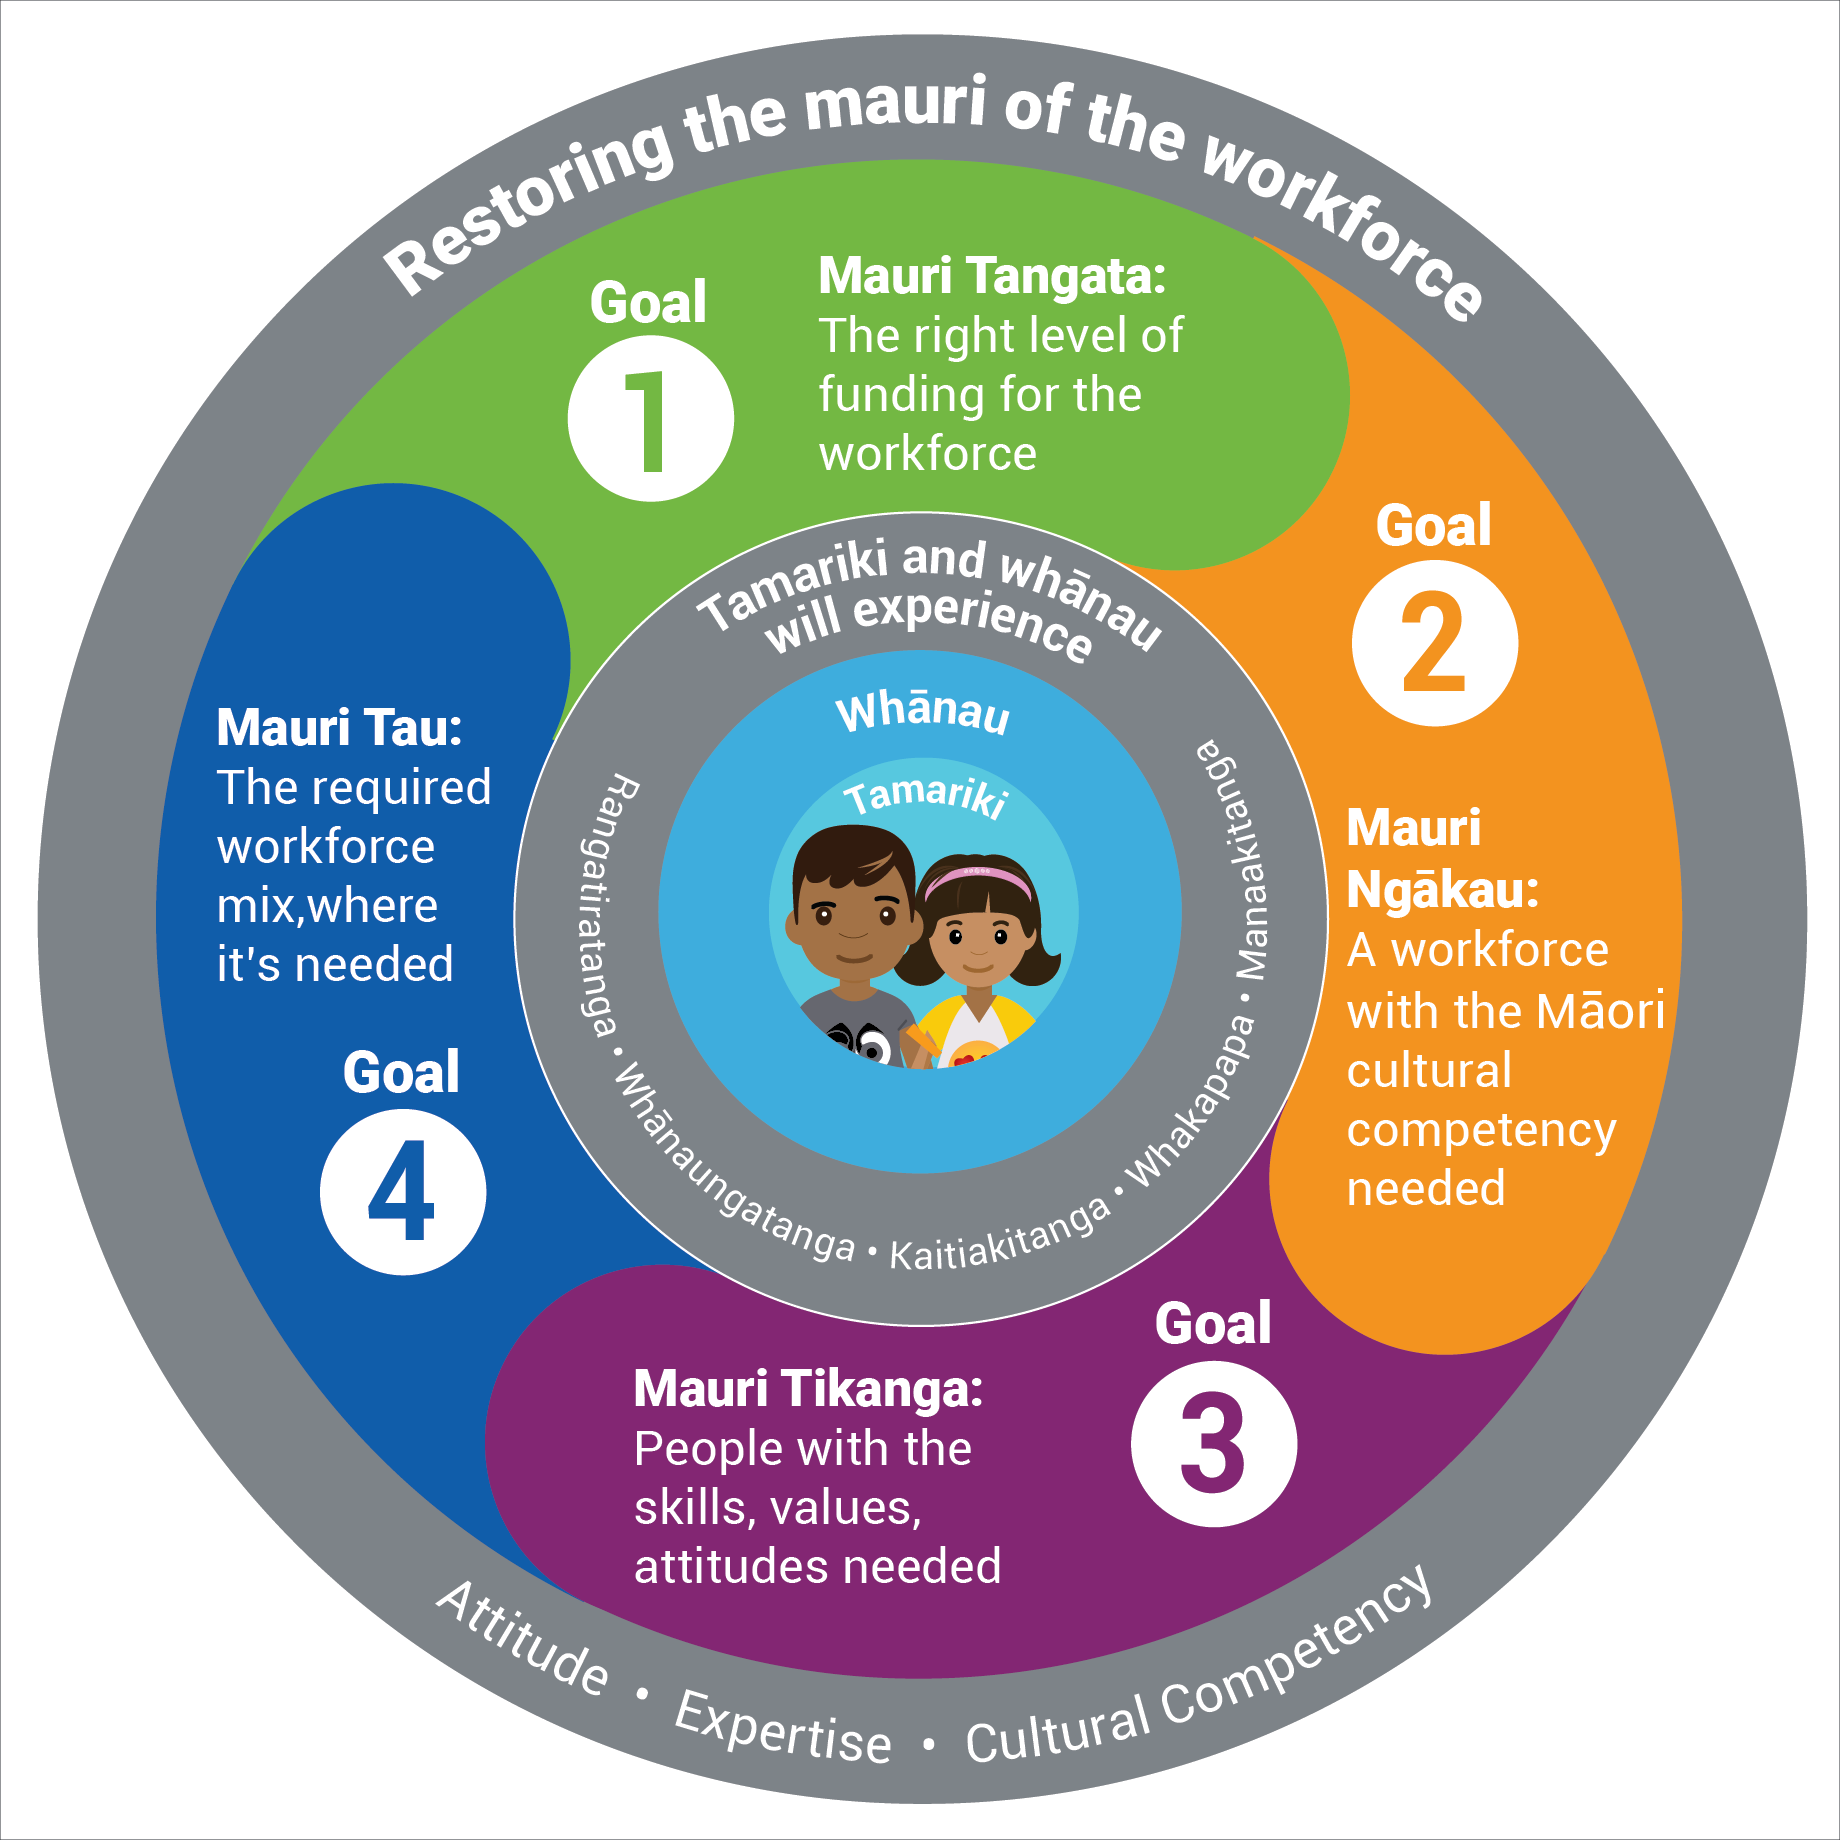 Children workforce plan image showing four goals and how they impact tamariki